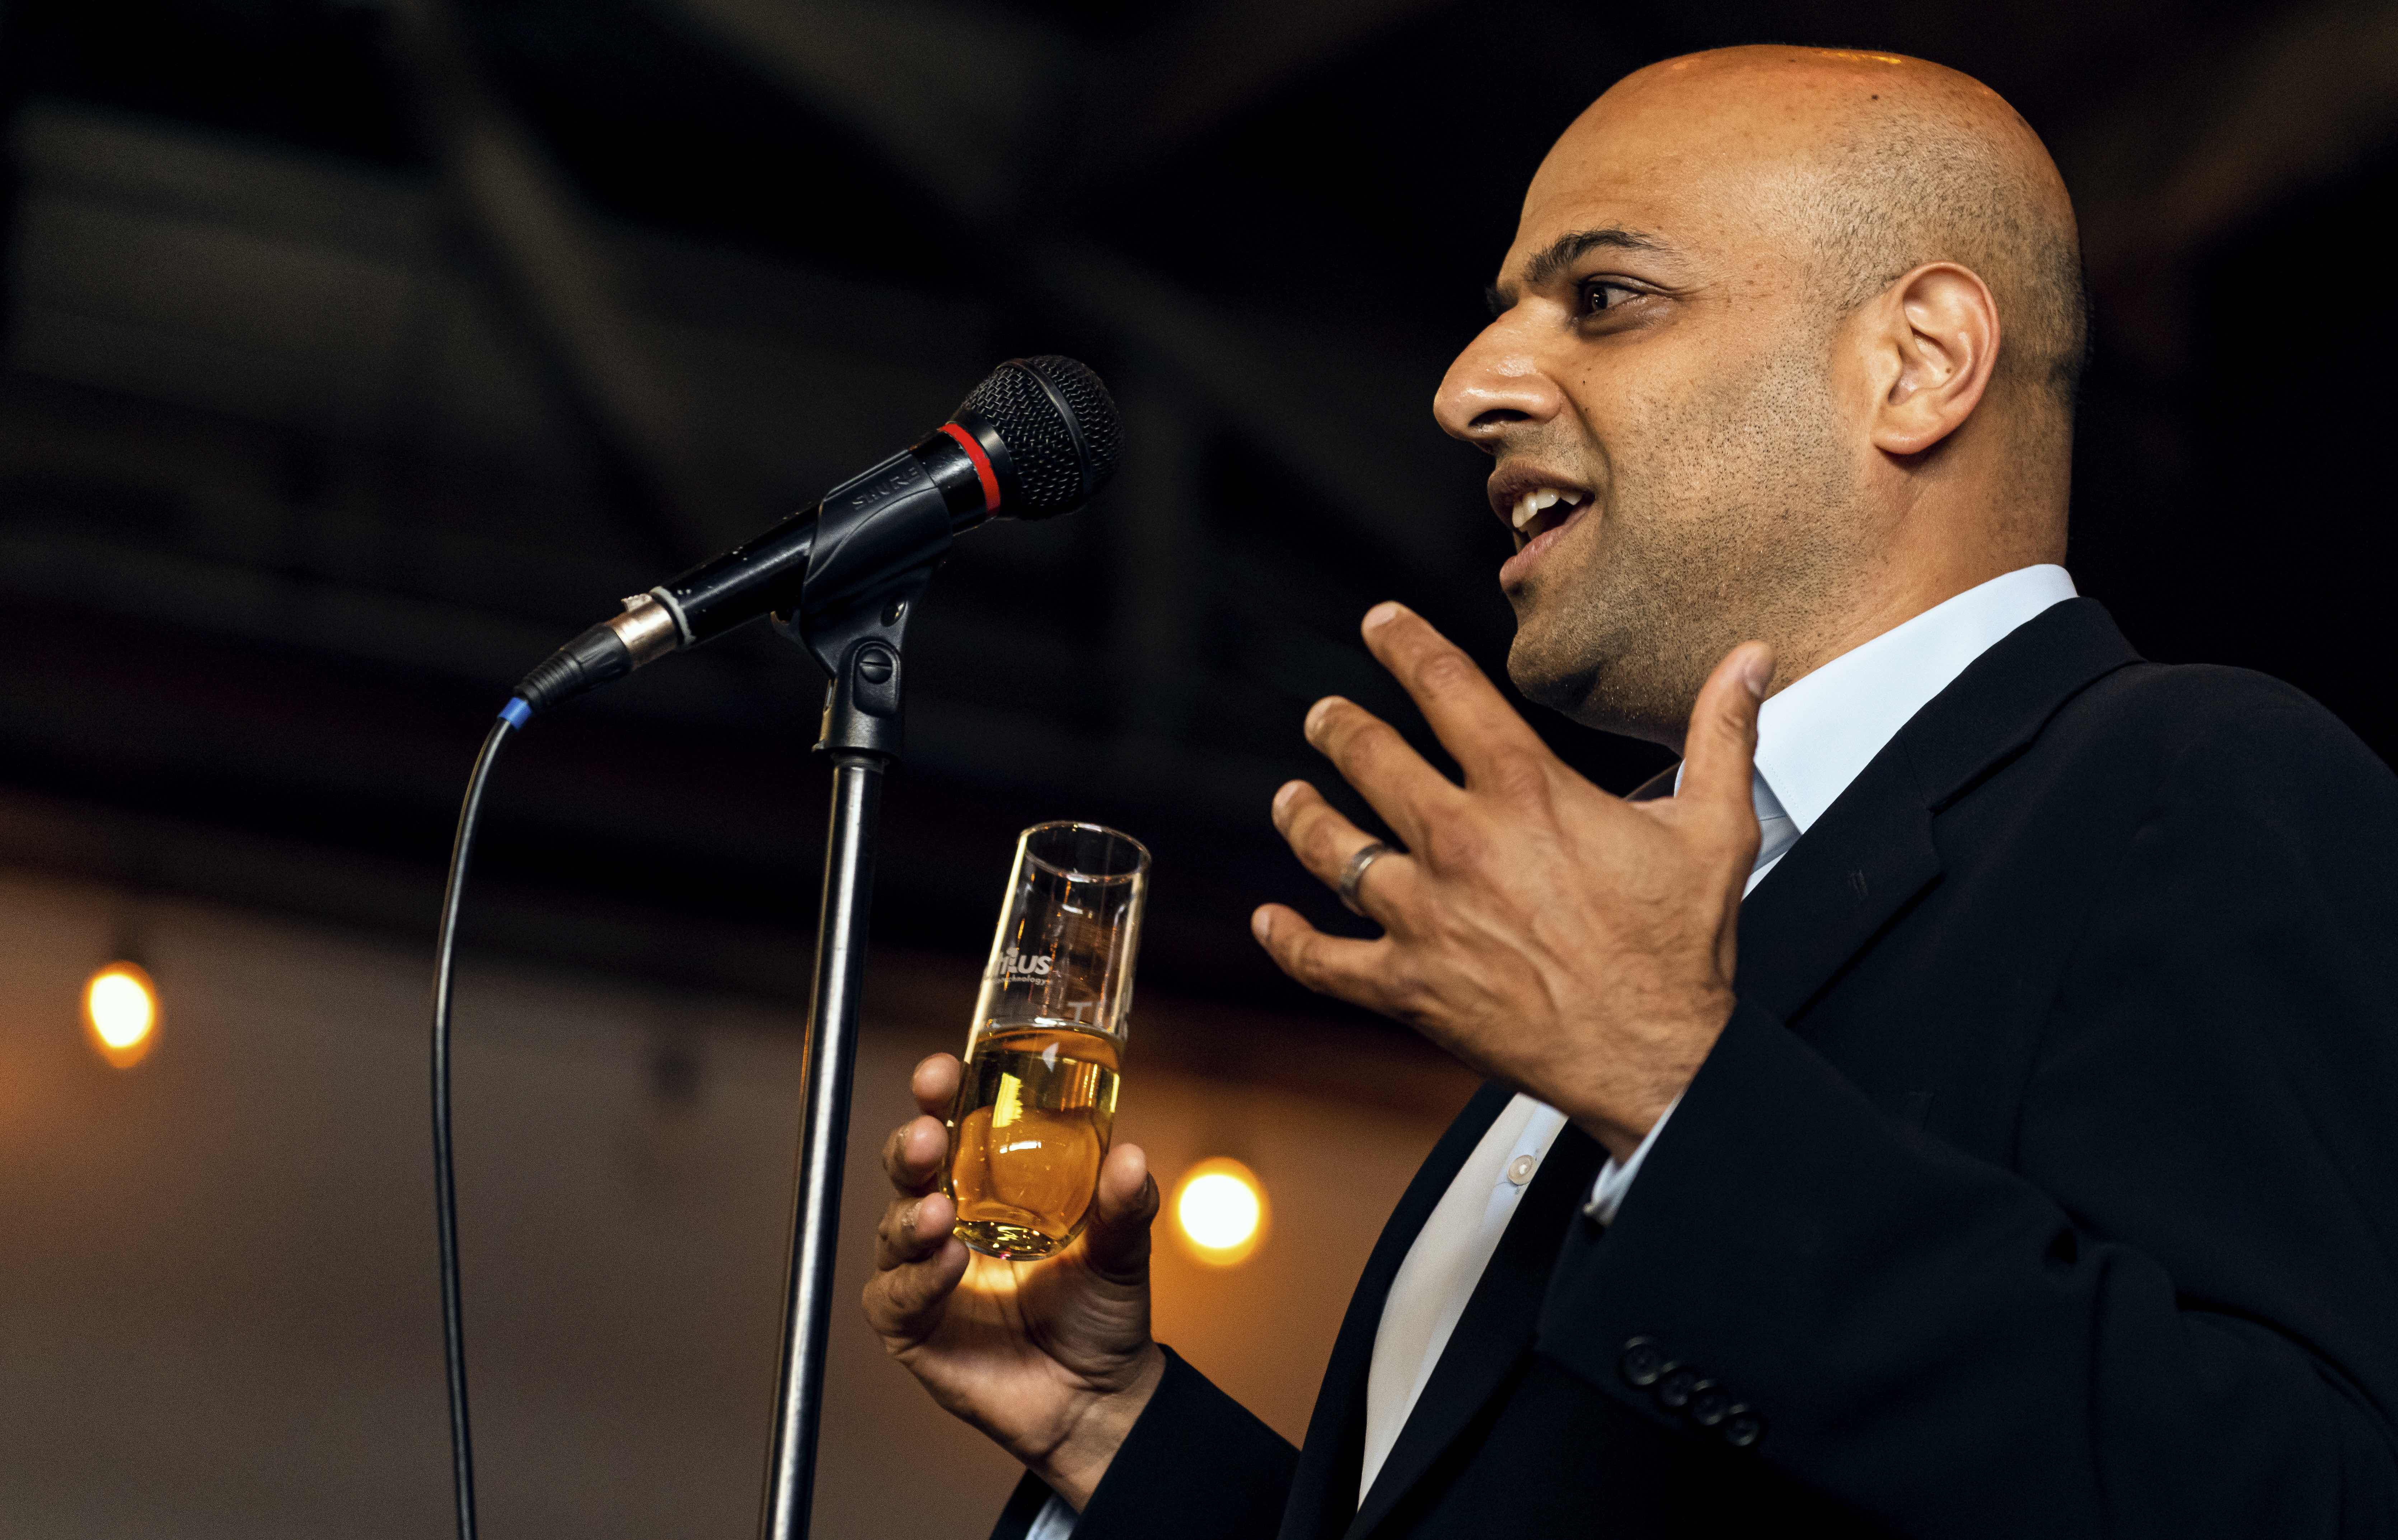 A man in a suit speaks into a microphone while holding a glass of champagne.